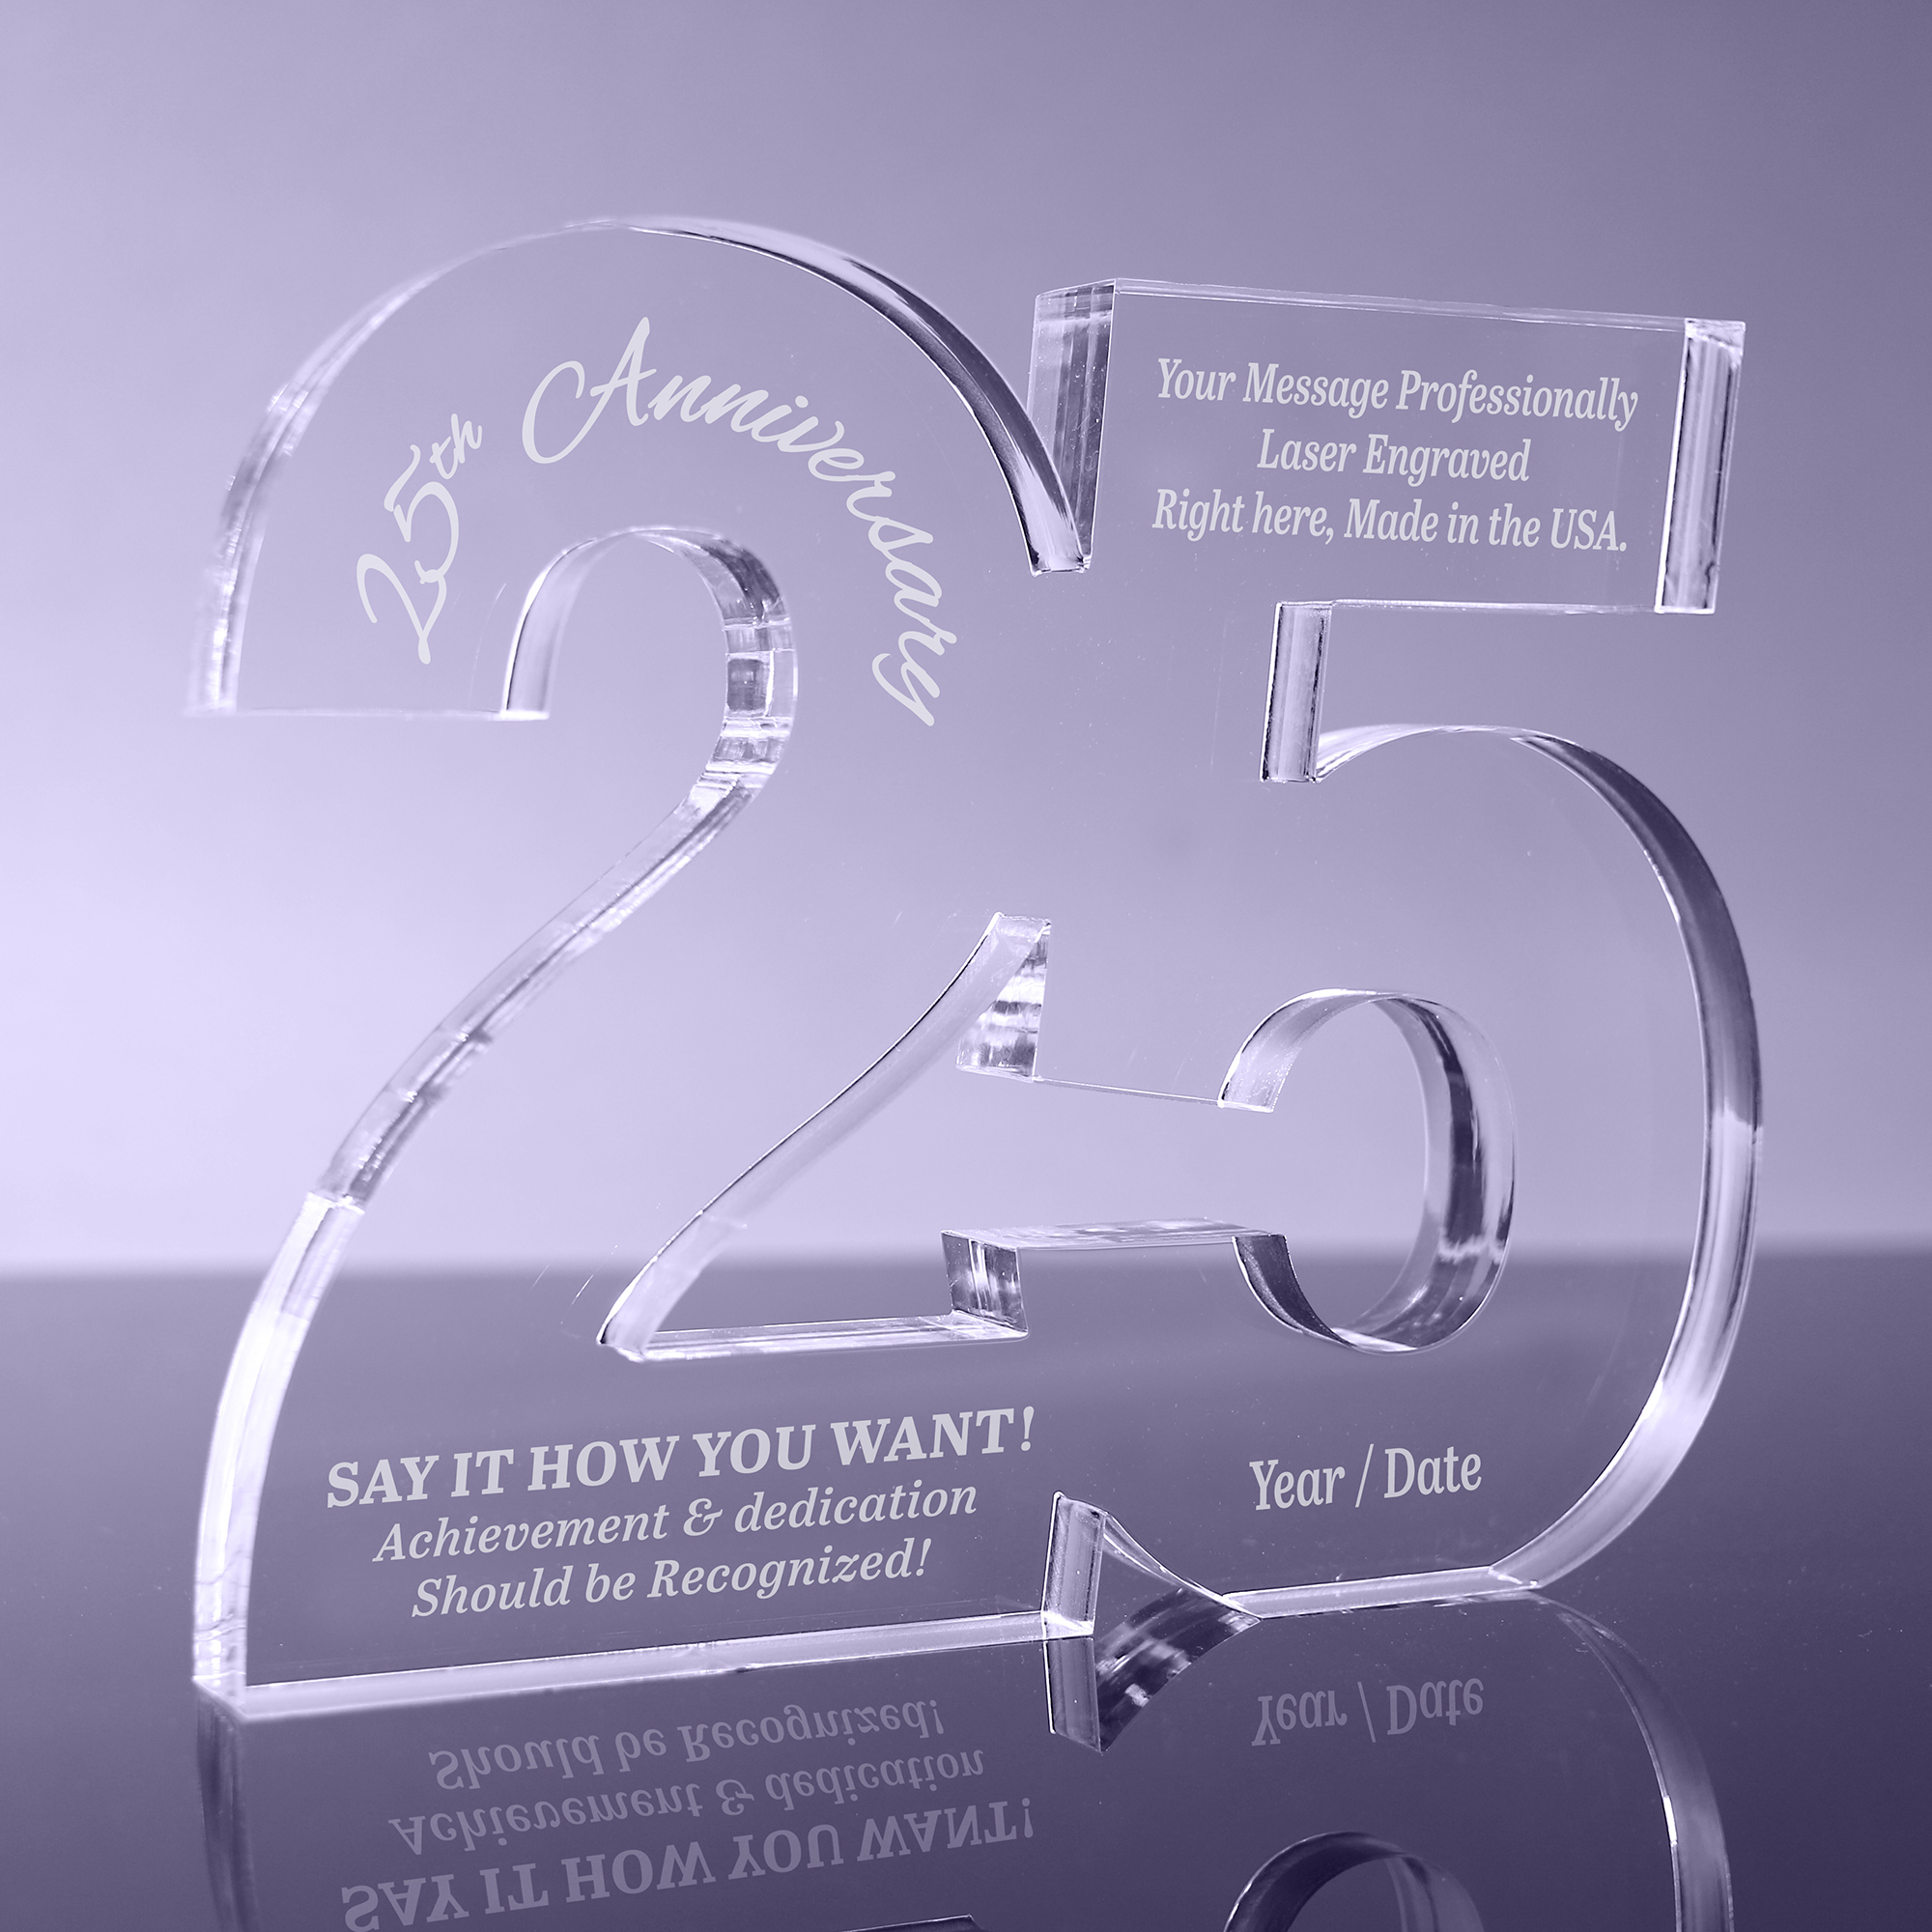 25 Number 1 inch Thick Acrylic Award - 8 inch